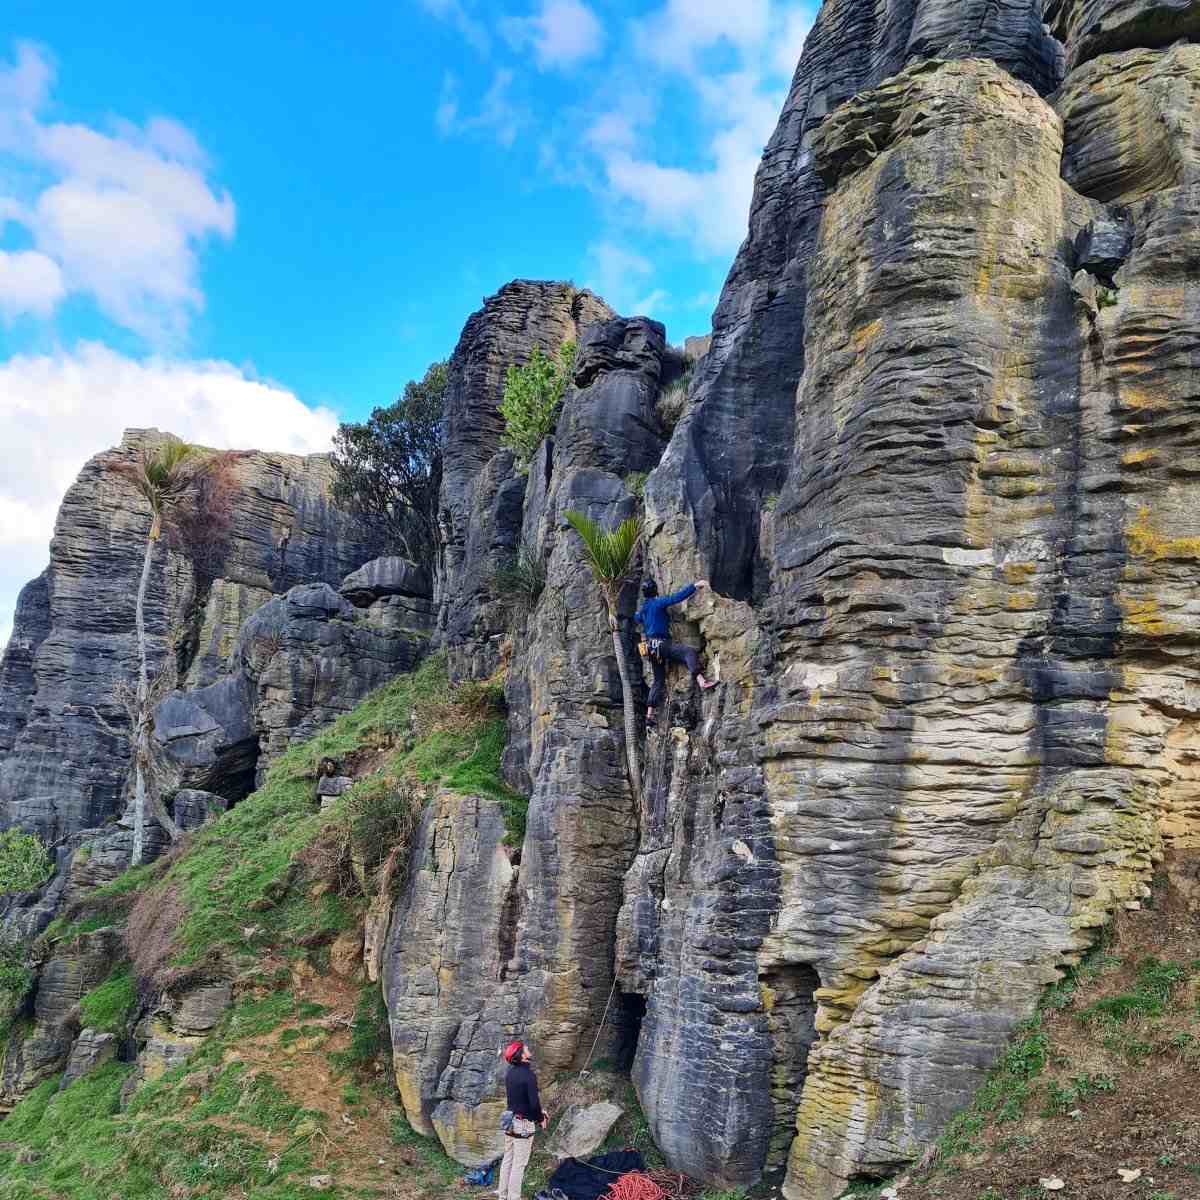 A pair of climbers on a limestone formation with strong horizontal layering.